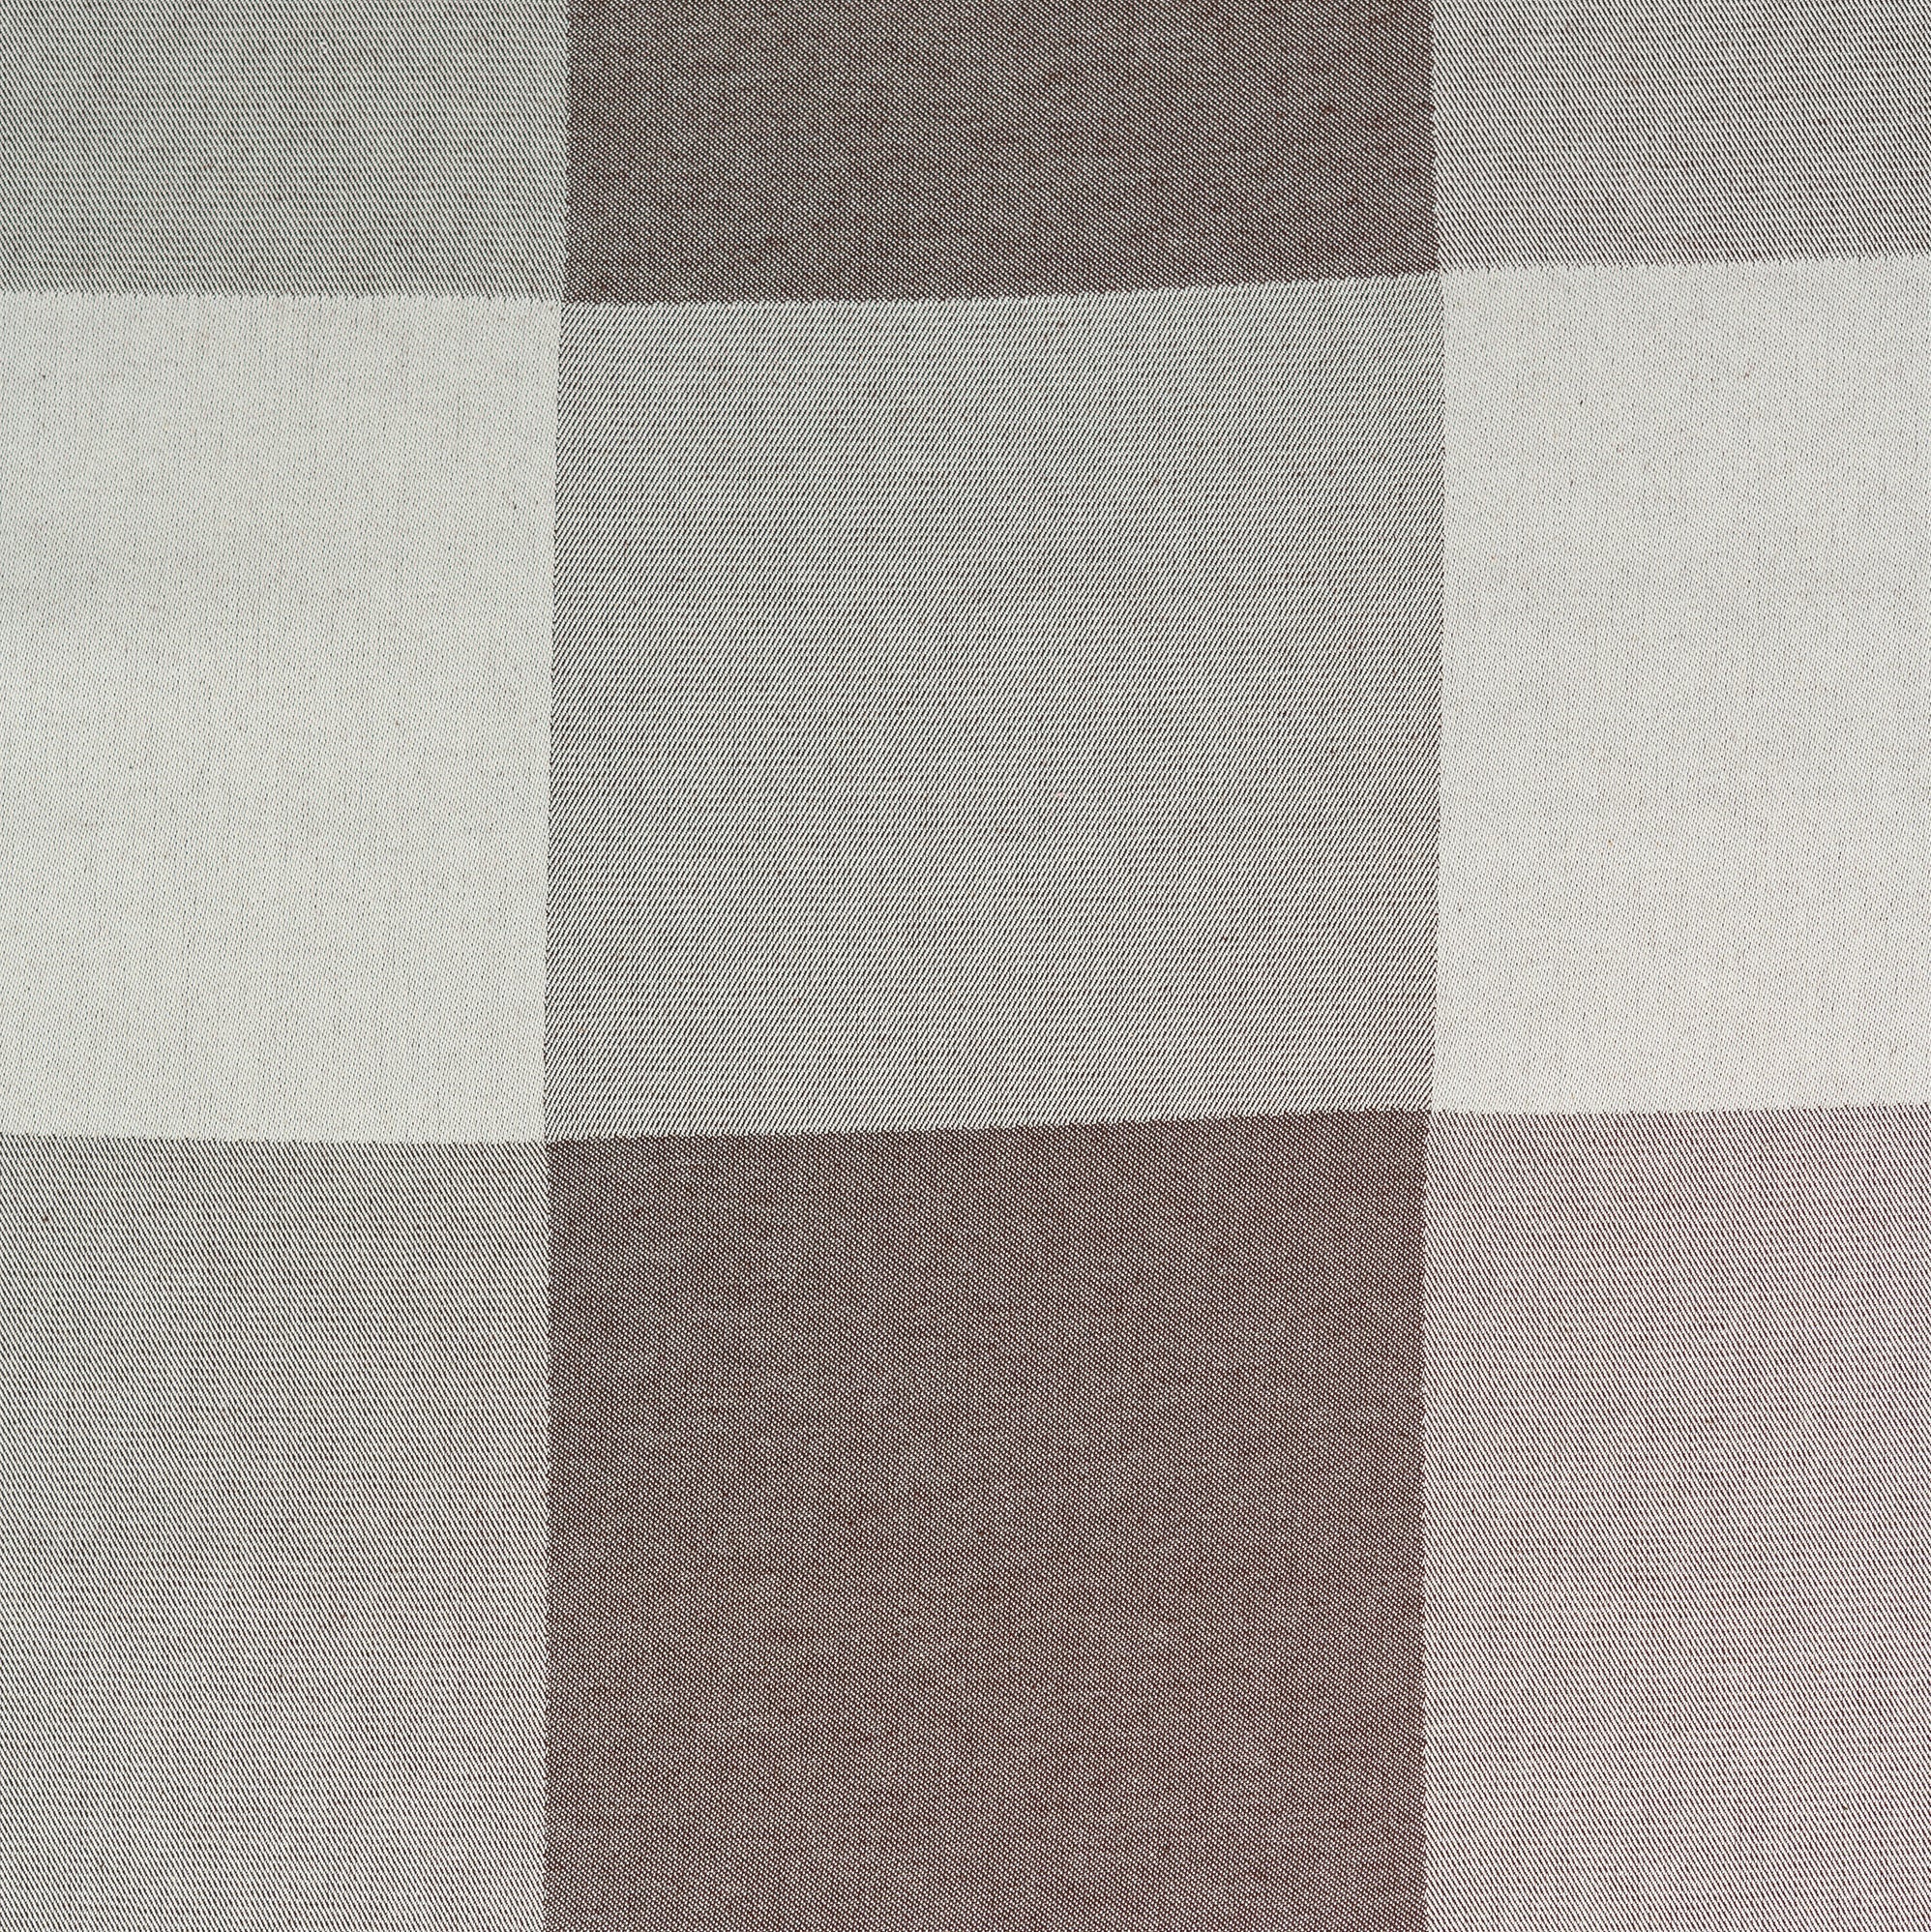 Large Woodhouse Check Cotton Fabric Chestnut sample